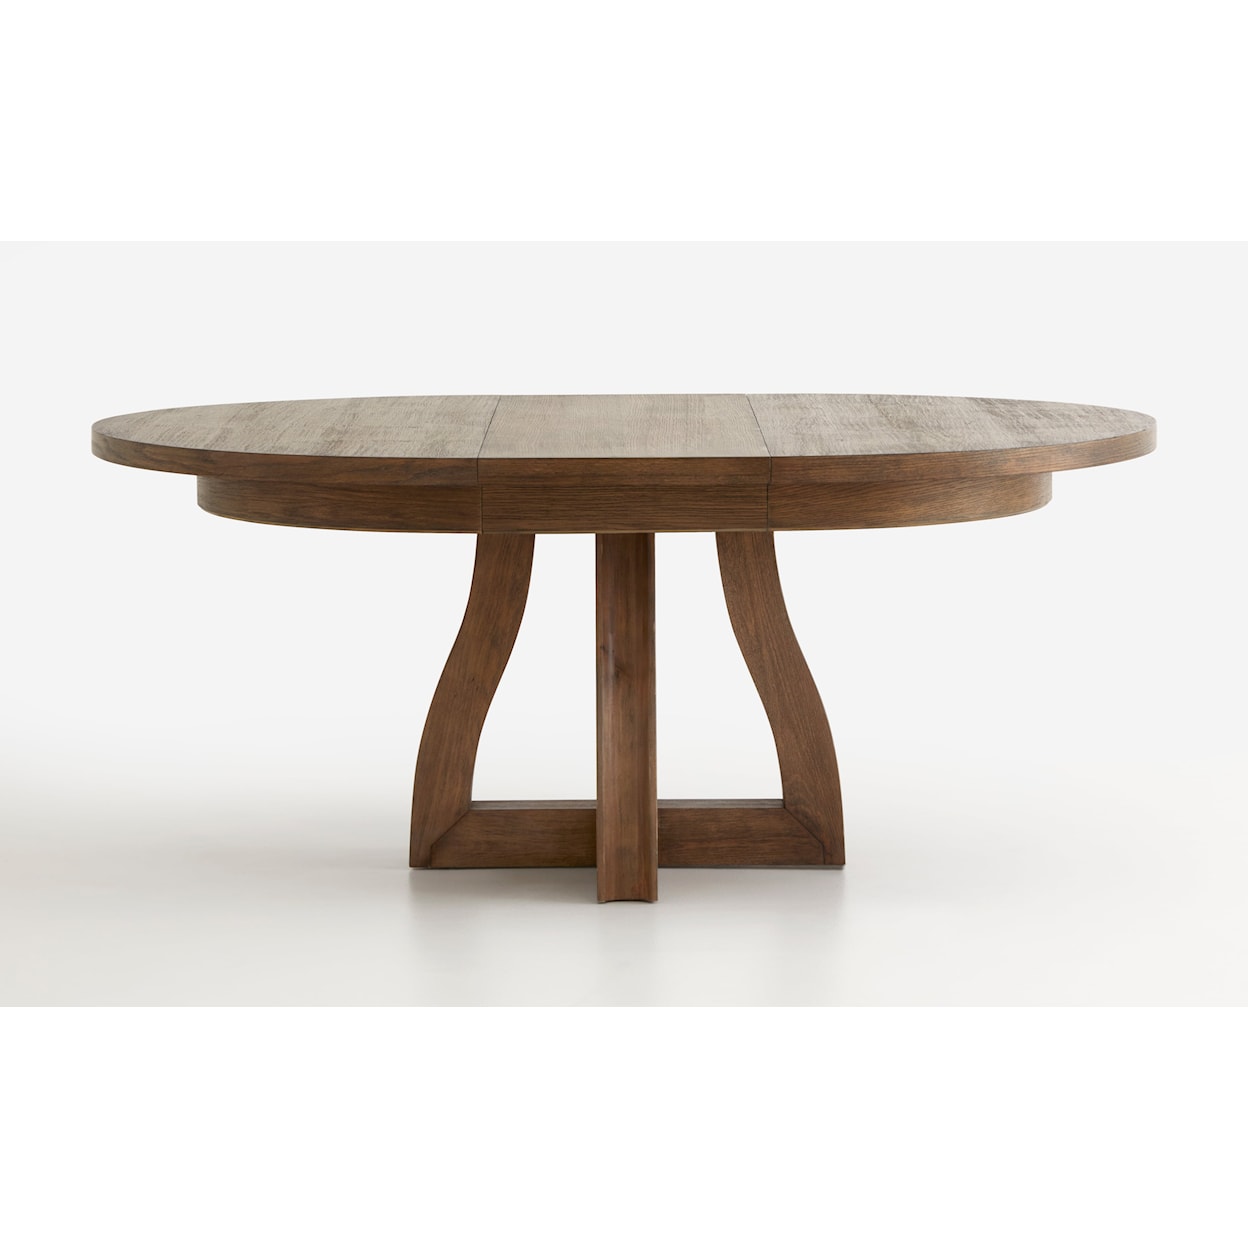 The Preserve Sugarland Round Dining Table